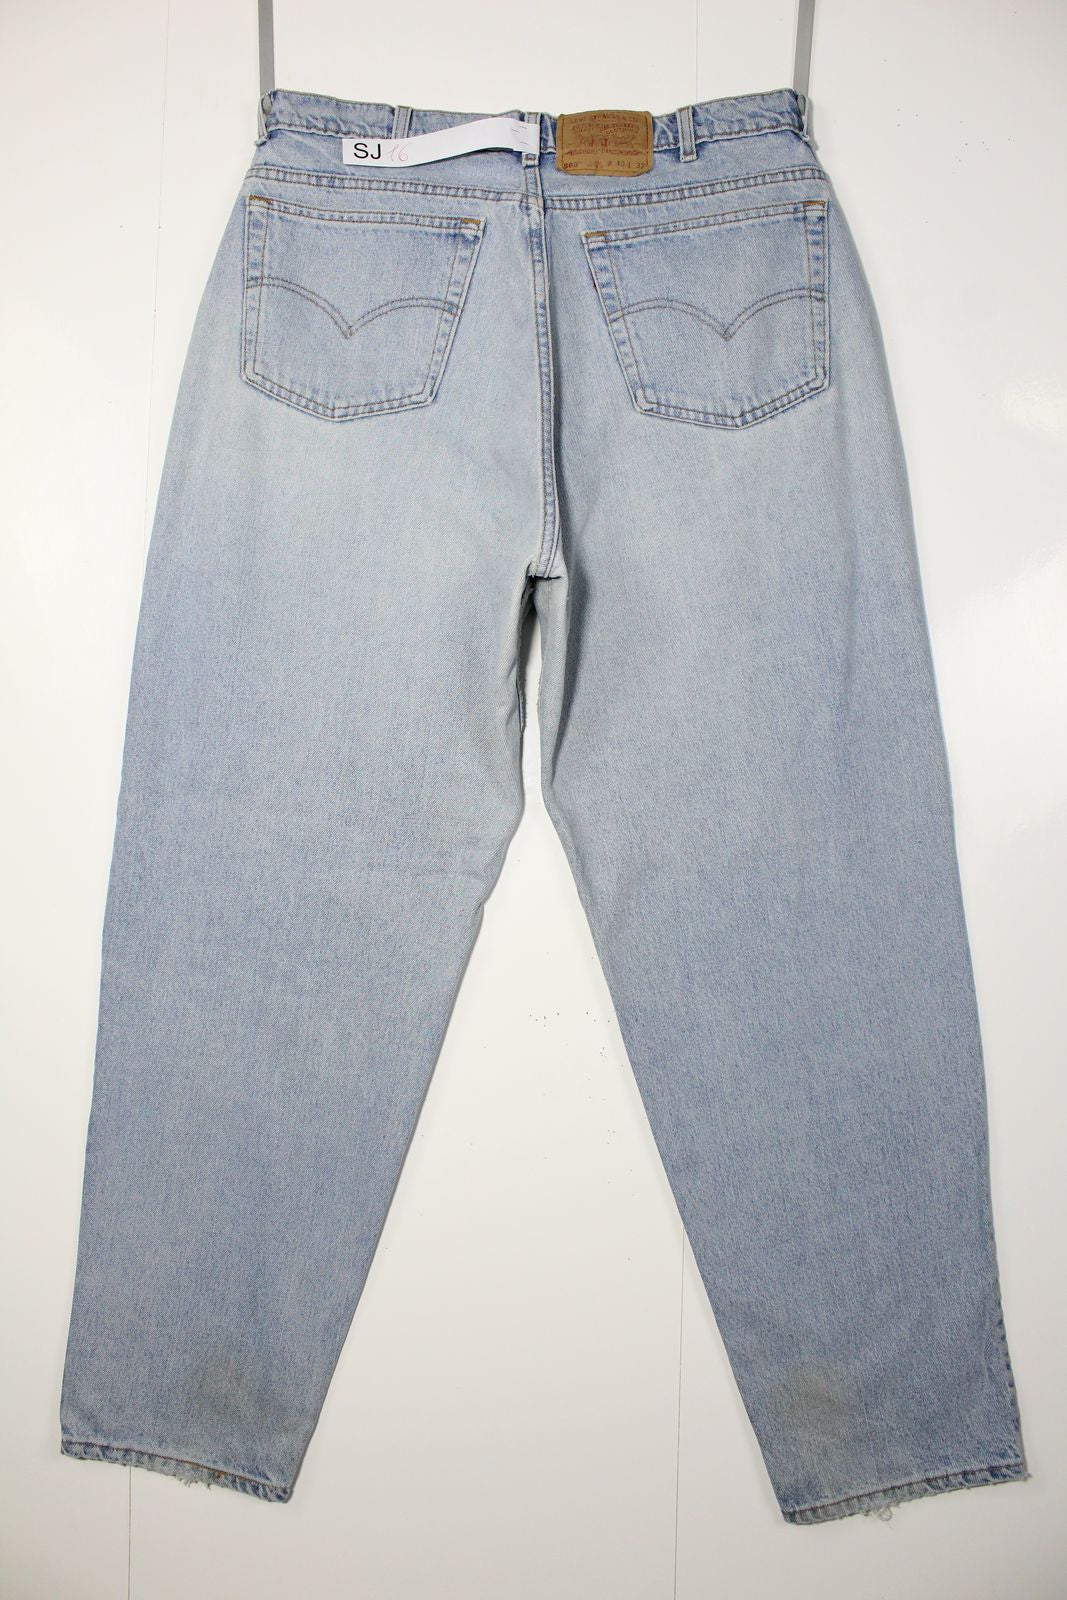 Levi's 560 Loose Fit Denim Made In USA W40 L32 Vintage